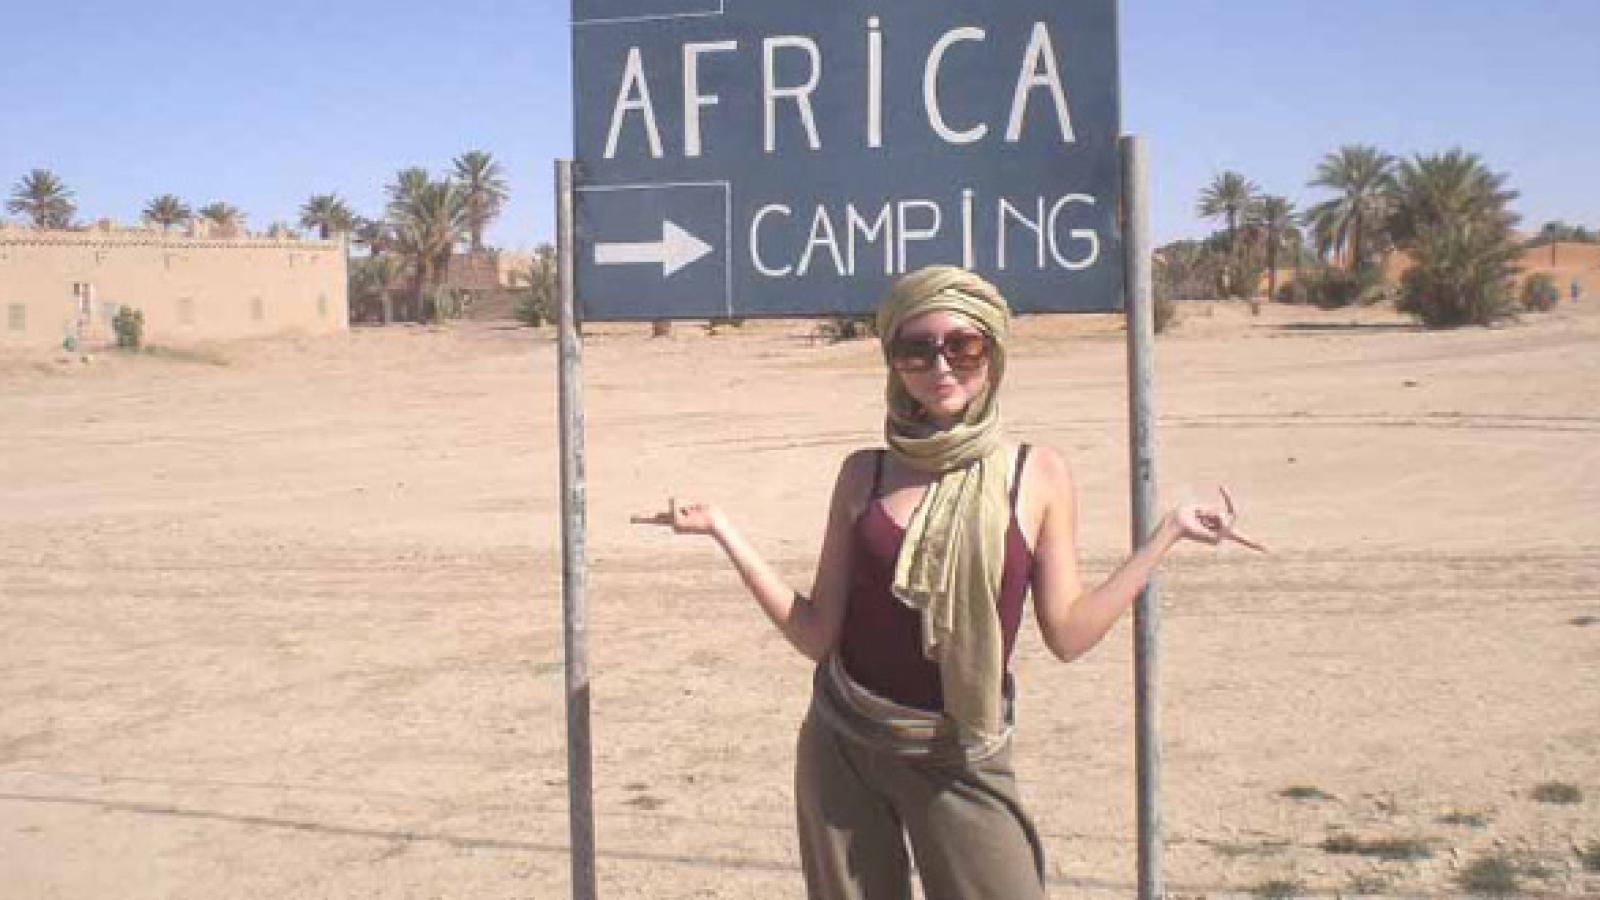 Taylar sporting a turban while in Morocco.